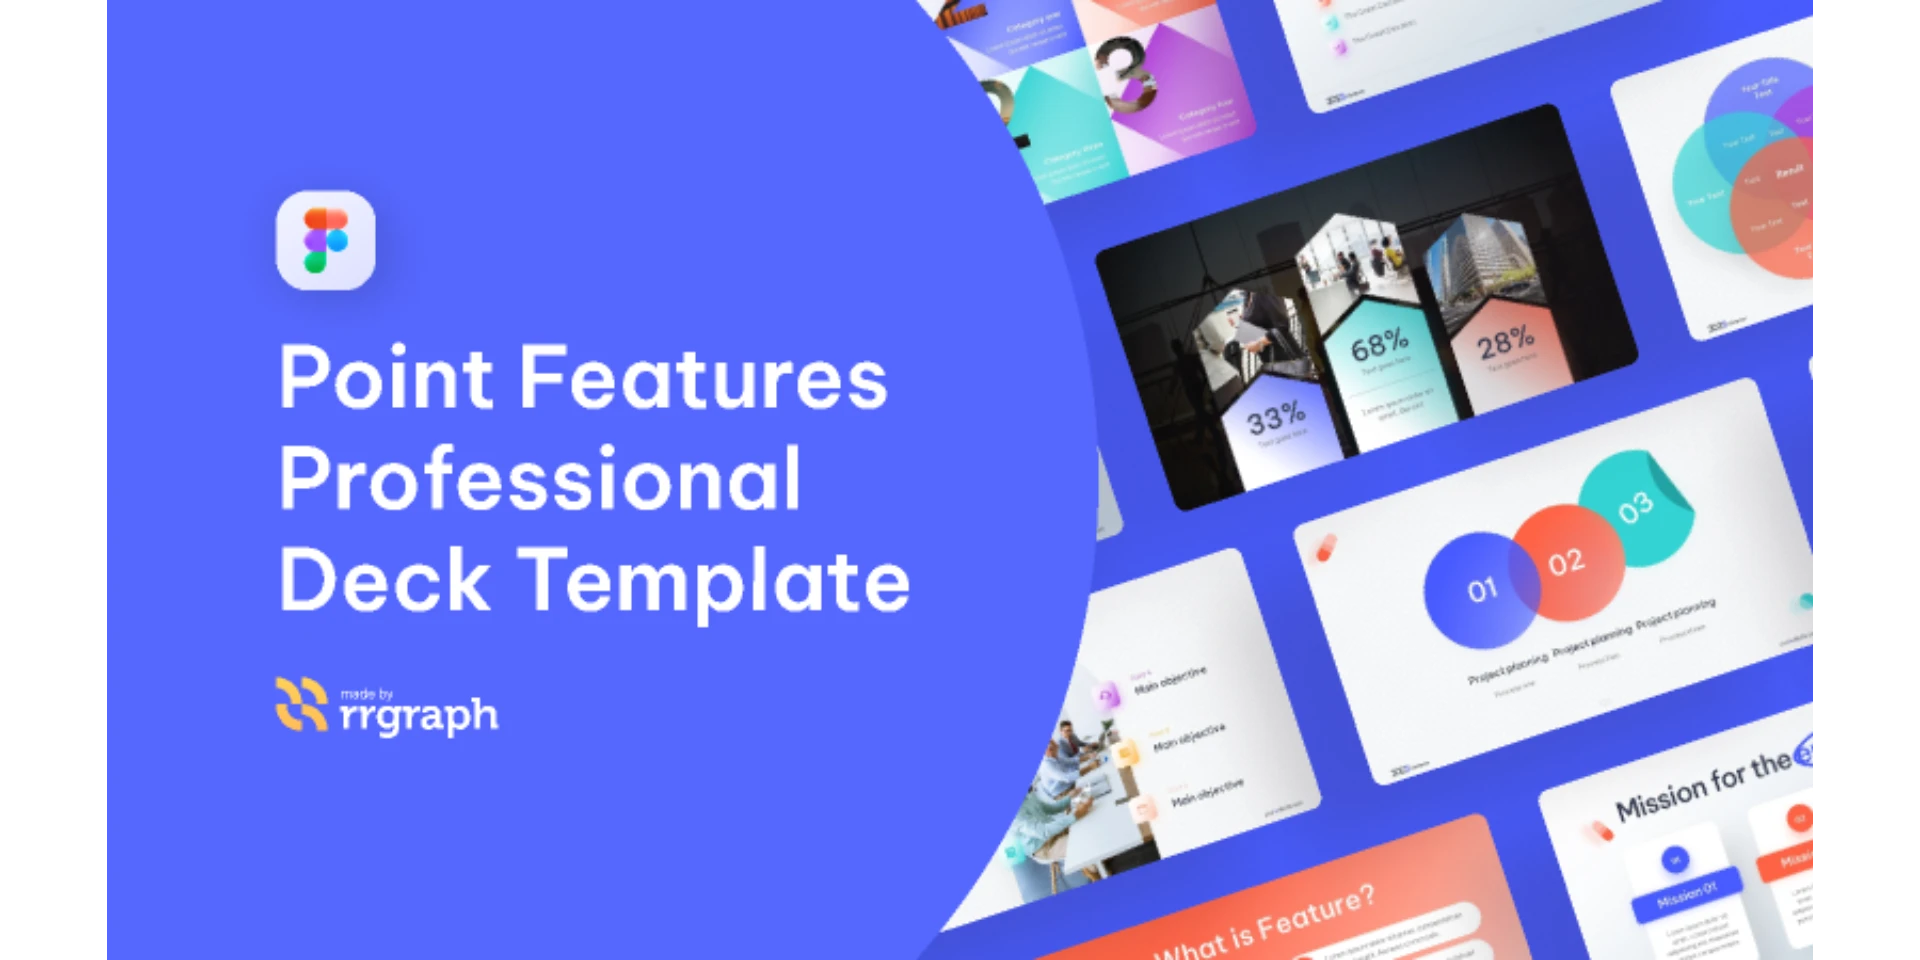 Free Point Features Professional Presentation Template for Figma and Adobe XD